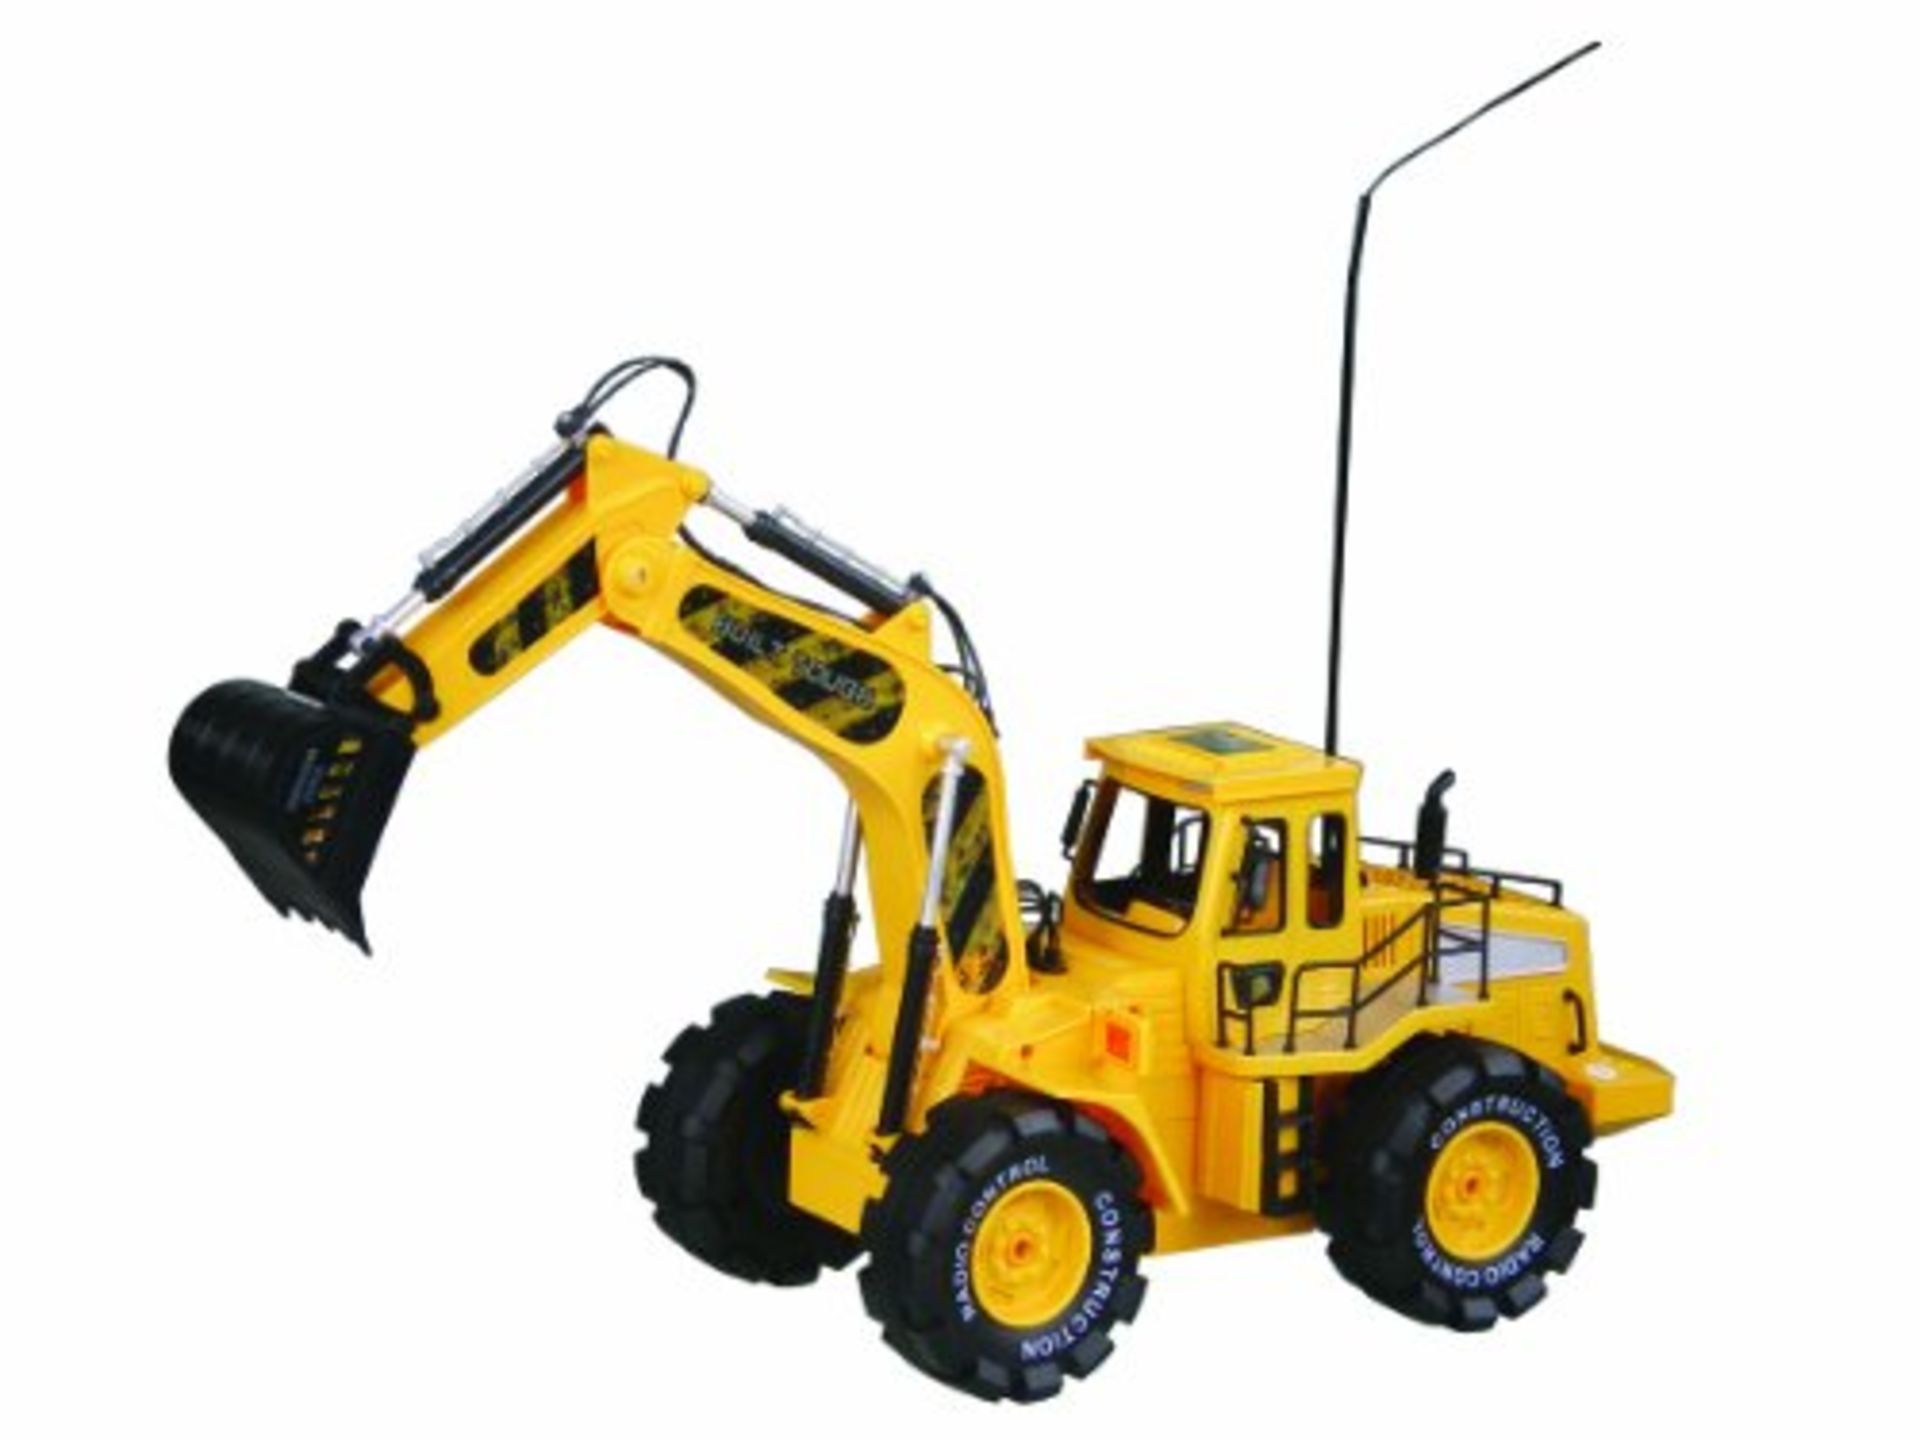 V *TRADE QTY* Brand New 1:10 Scale Full Function Radio Controlled Construction Vehicle (Reach Arm) X